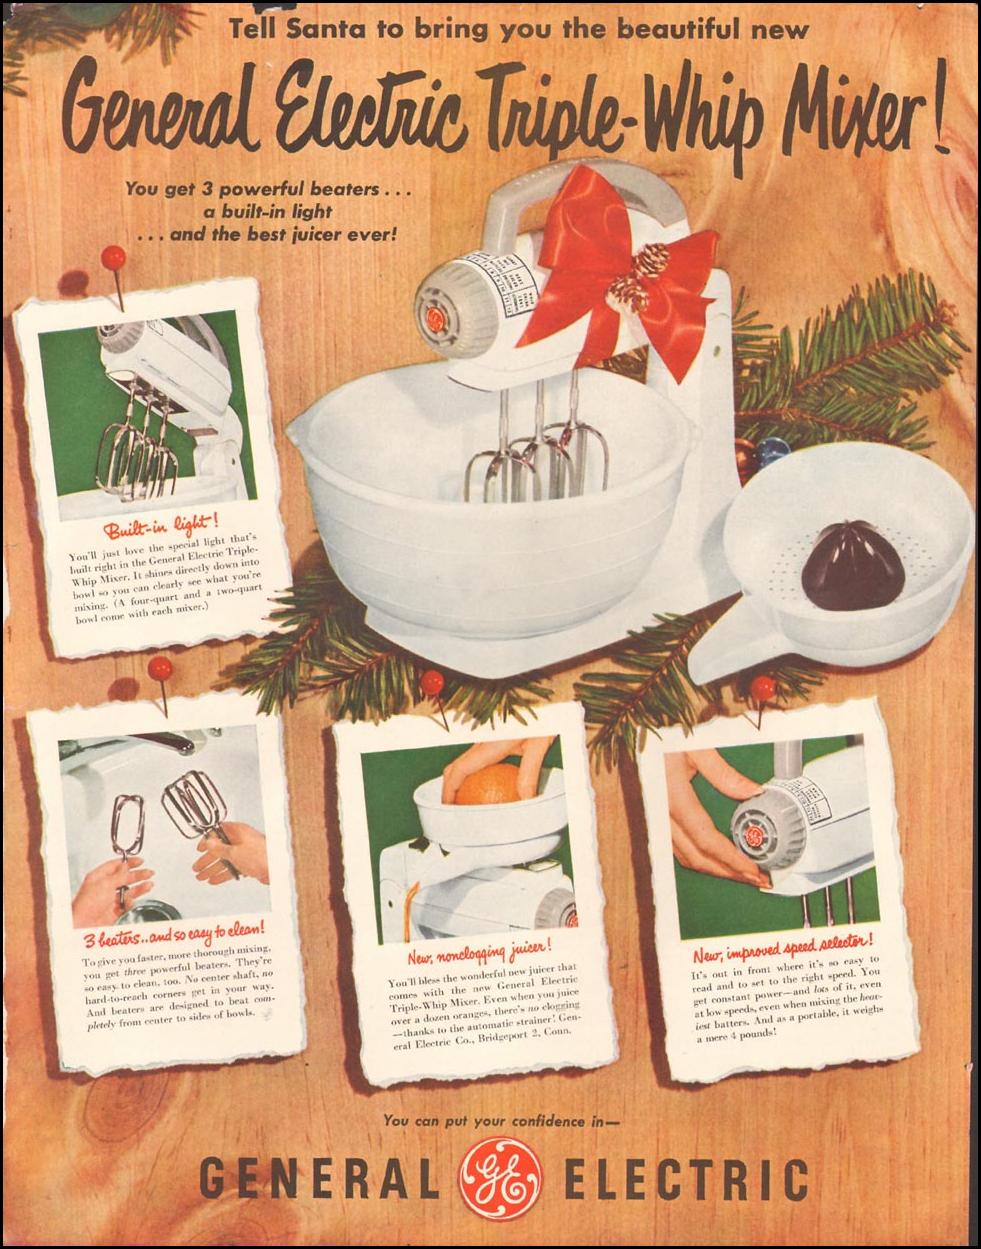 GENERAL ELECTRIC TRIPLE-WHIP MIXER
LADIES' HOME JOURNAL
11/01/1950
INSIDE BACK